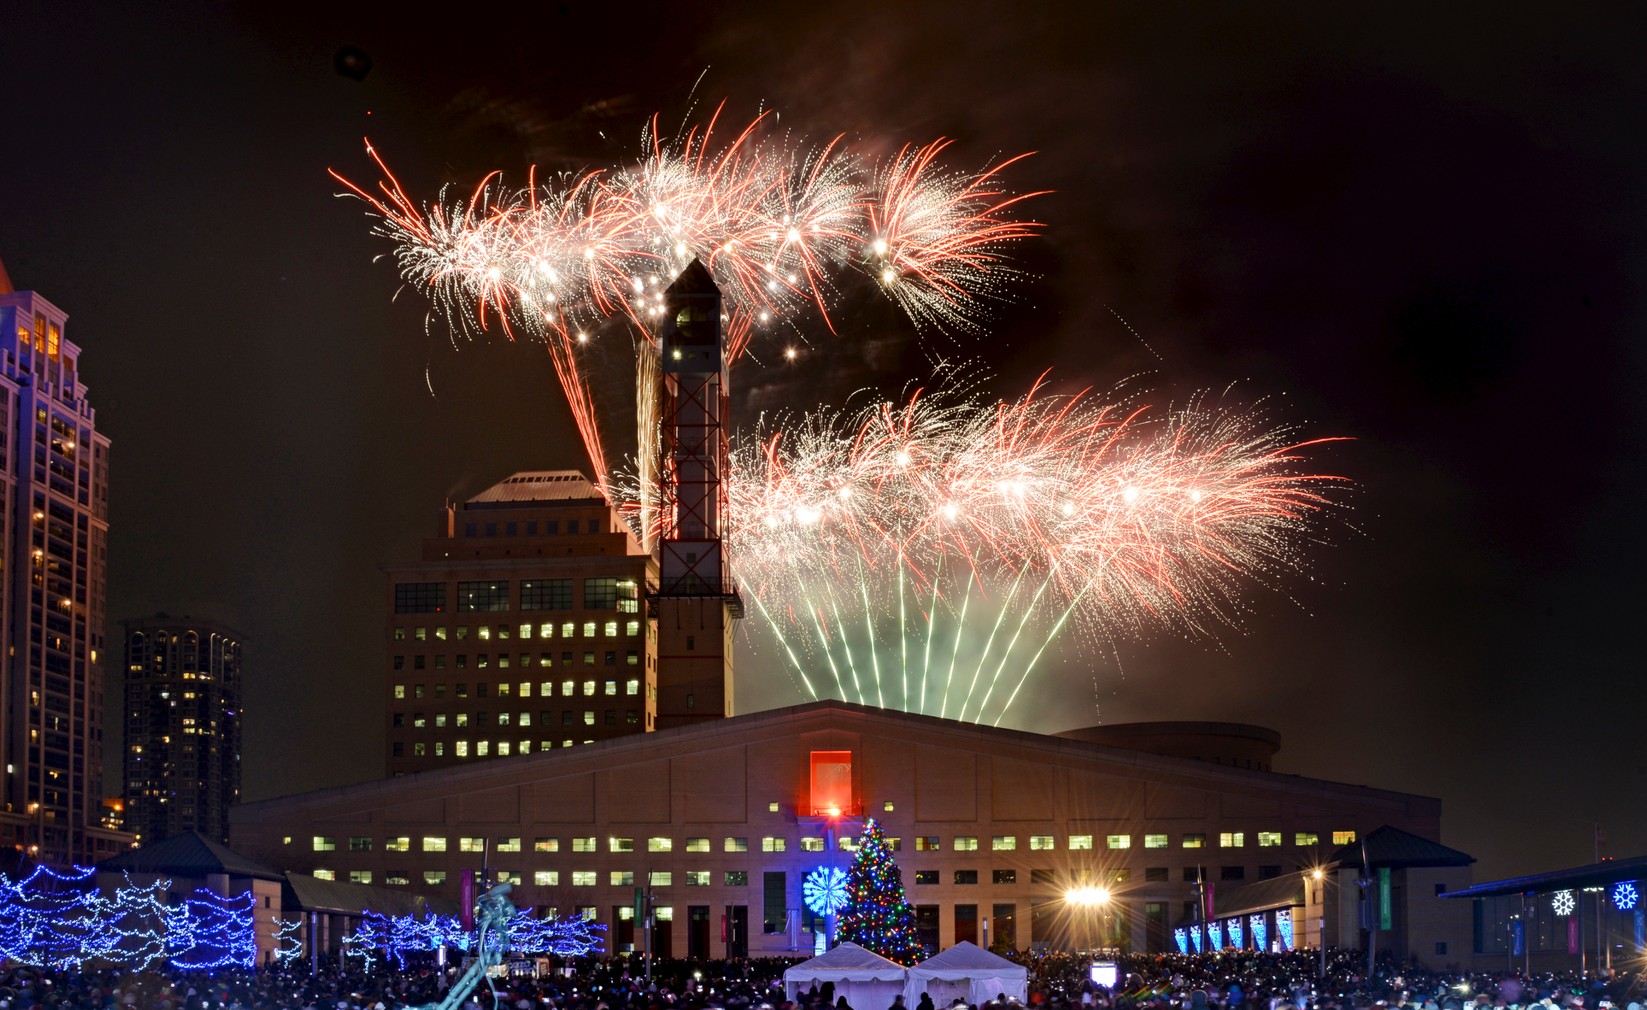 MISSISSAUGA PLANNING INPERSON NEW YEAR'S EVE CELEBRATION